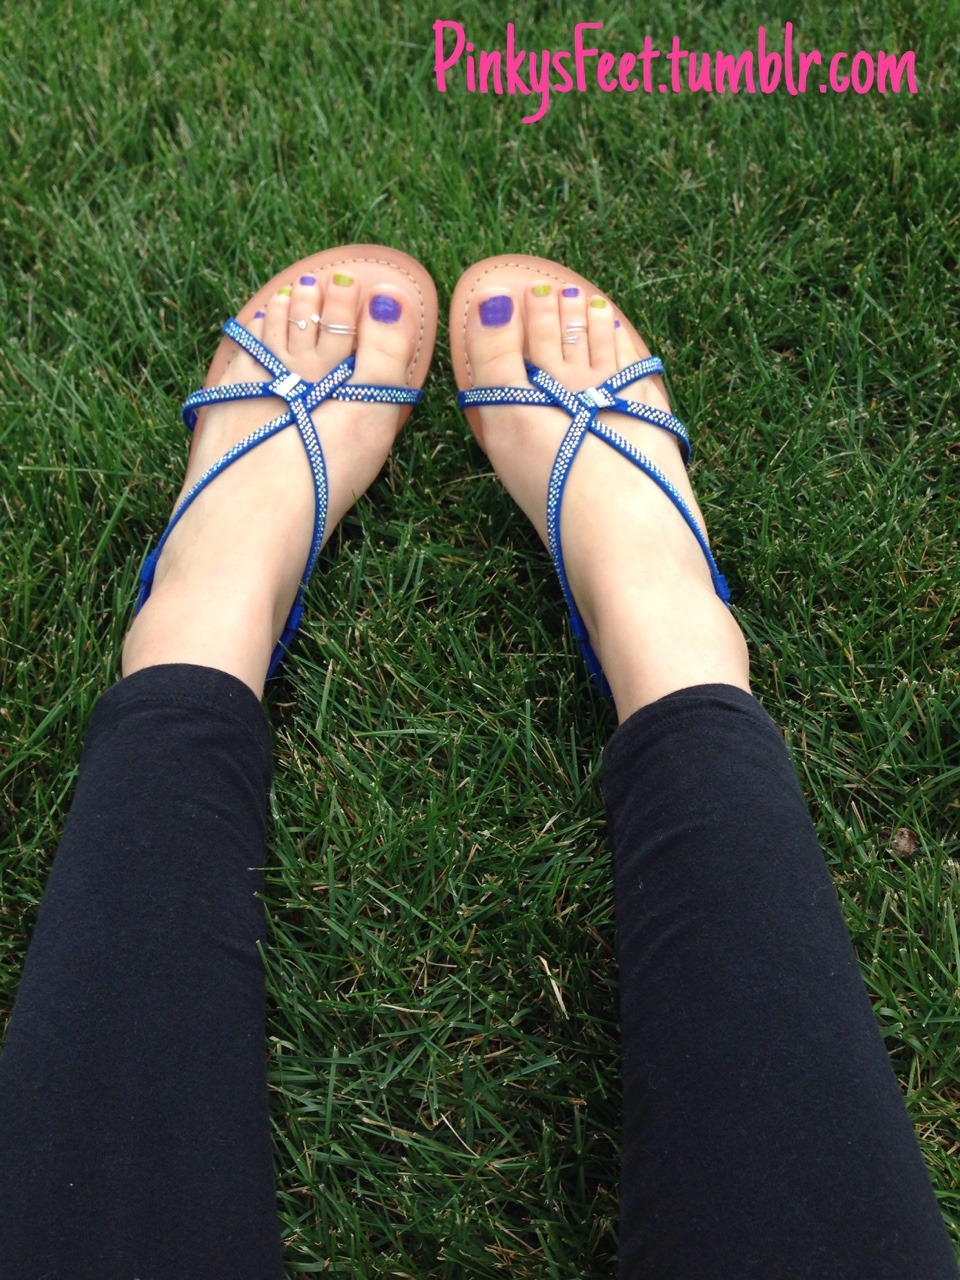 jorgepies:  pinkysfeet:  Thank you for the pretty sandals. Love them! male-foot-whore-submissive